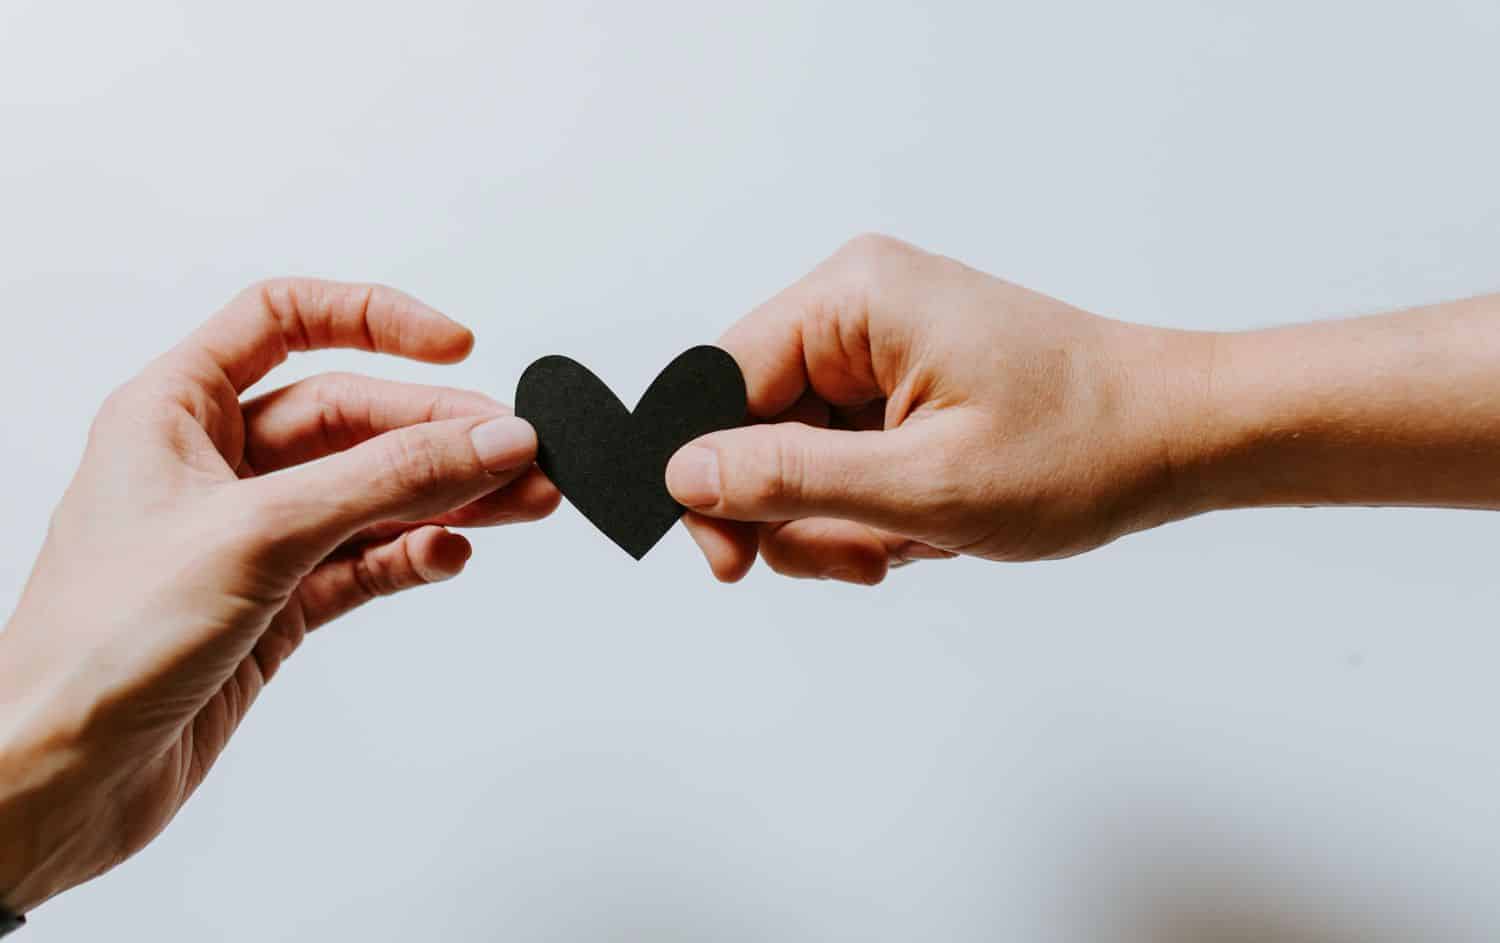 A person hands a paper heart to another person in front of a white backdrop.